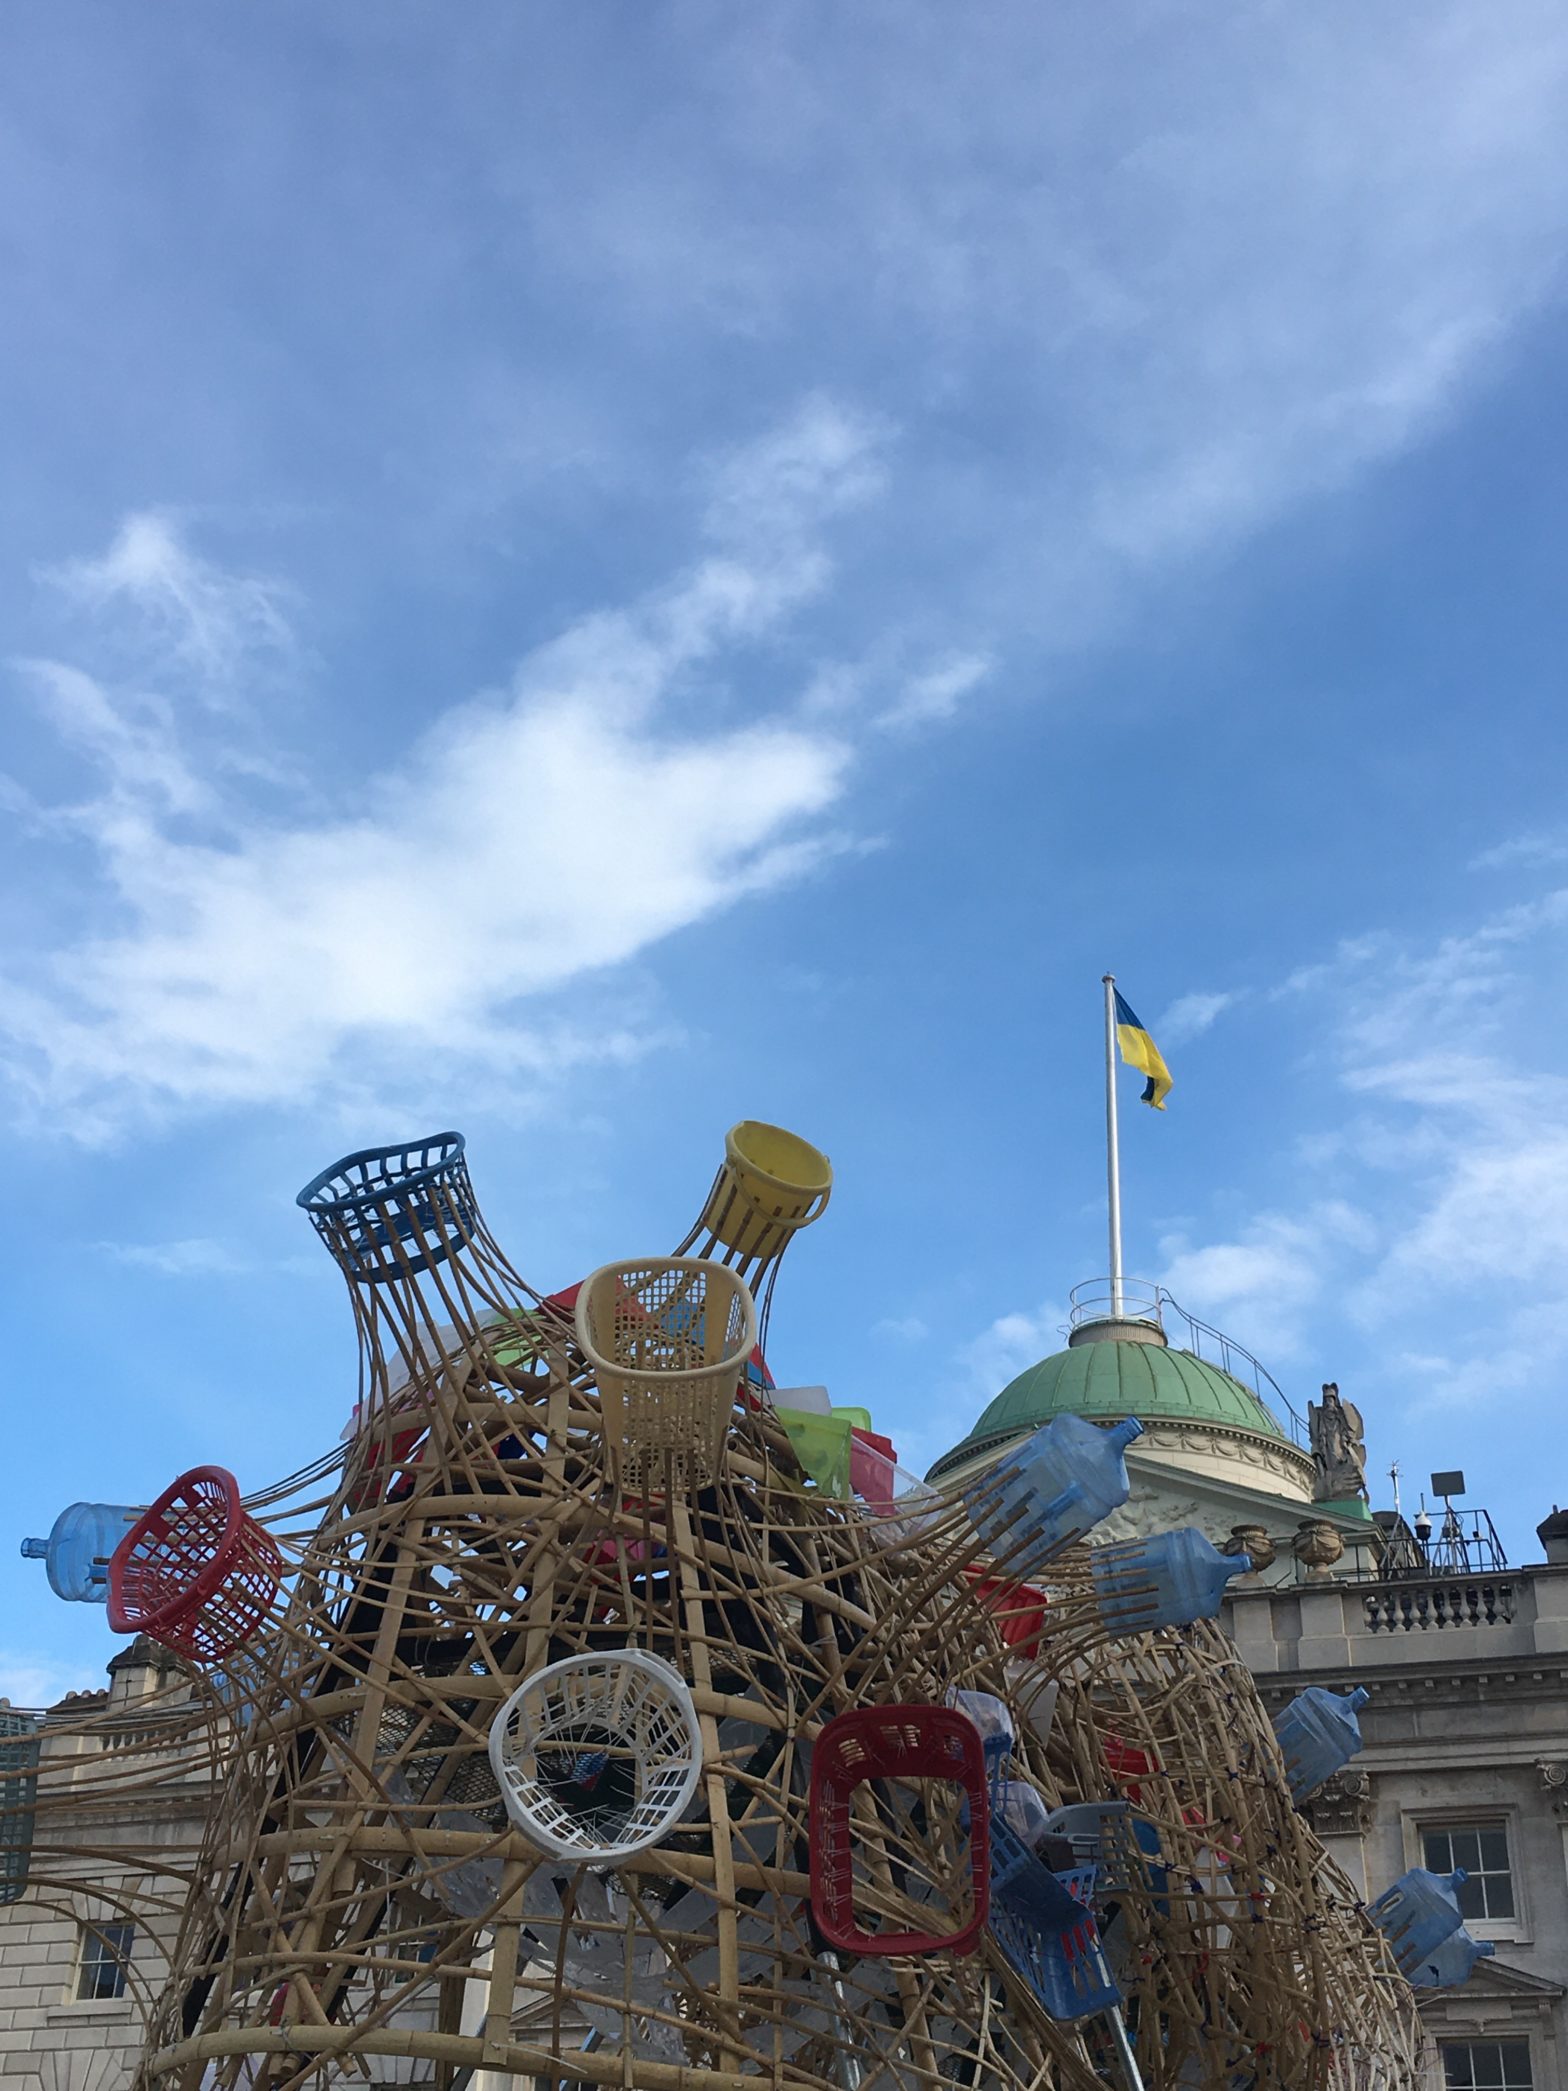 Leeroy New's sculptures at Somerset House